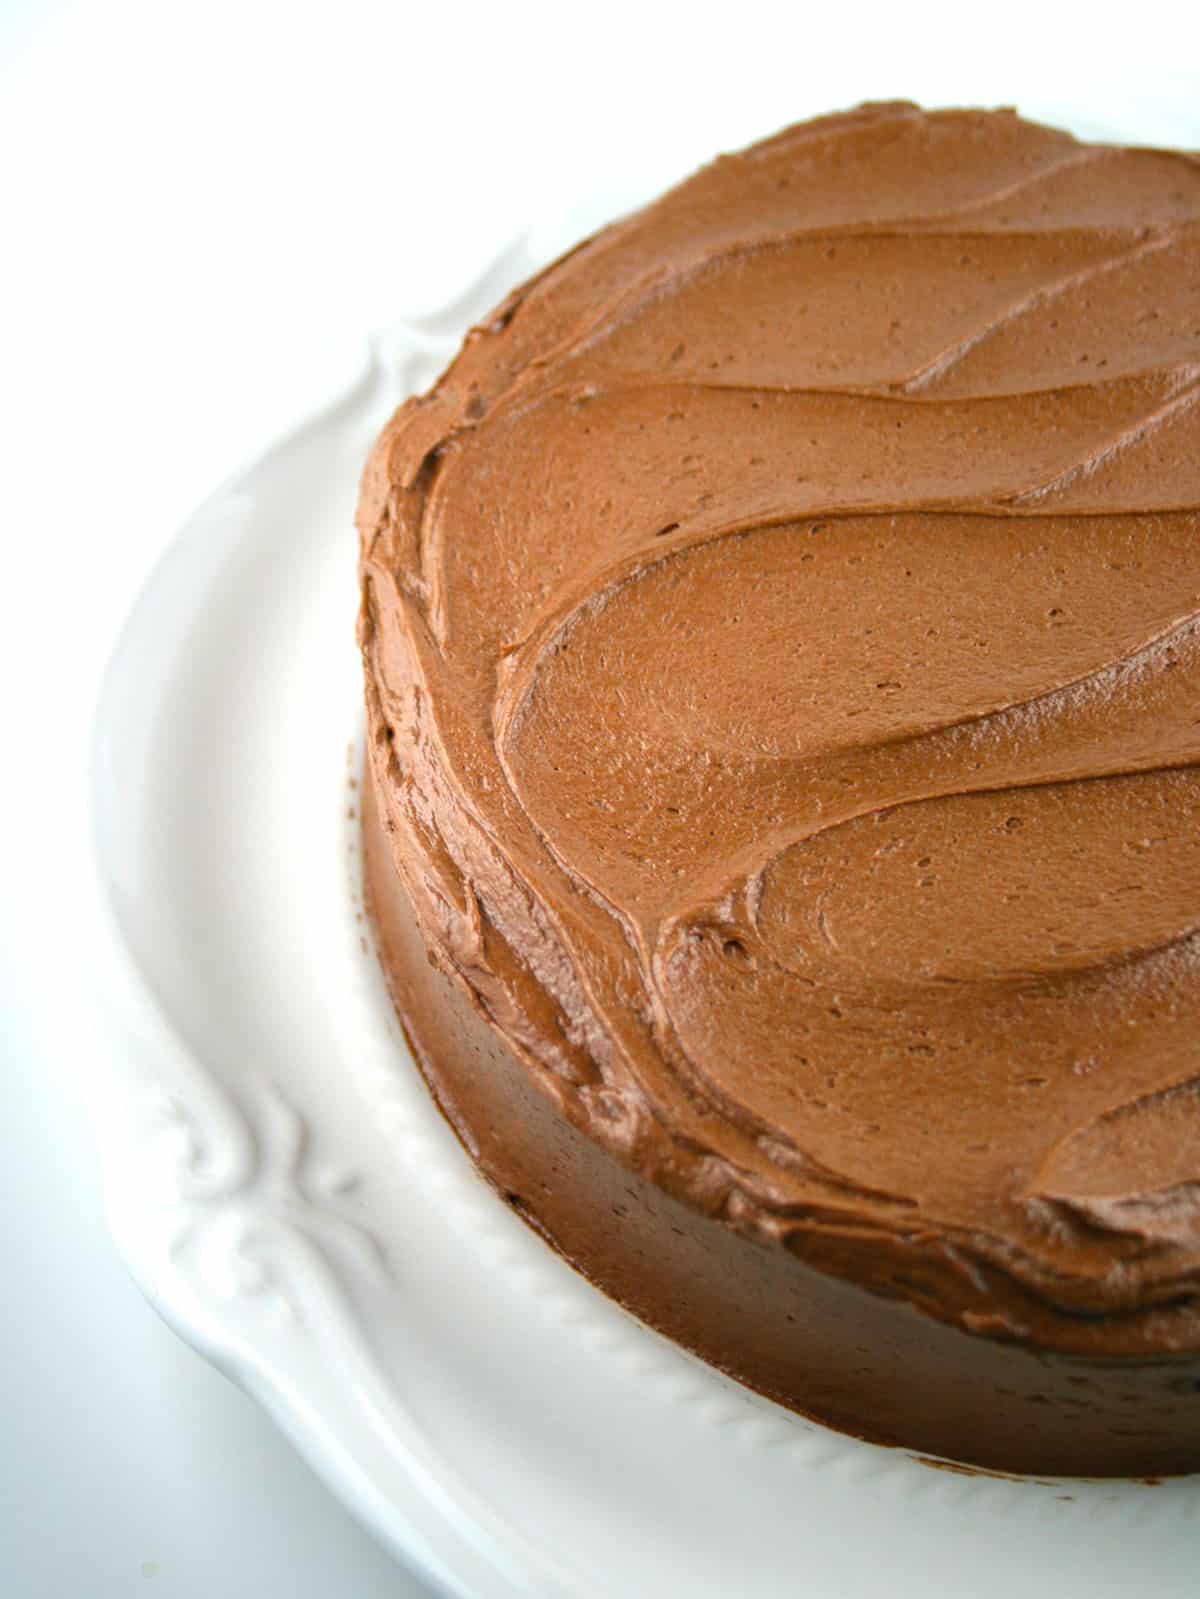 Frosted chocolate cake with no piping.